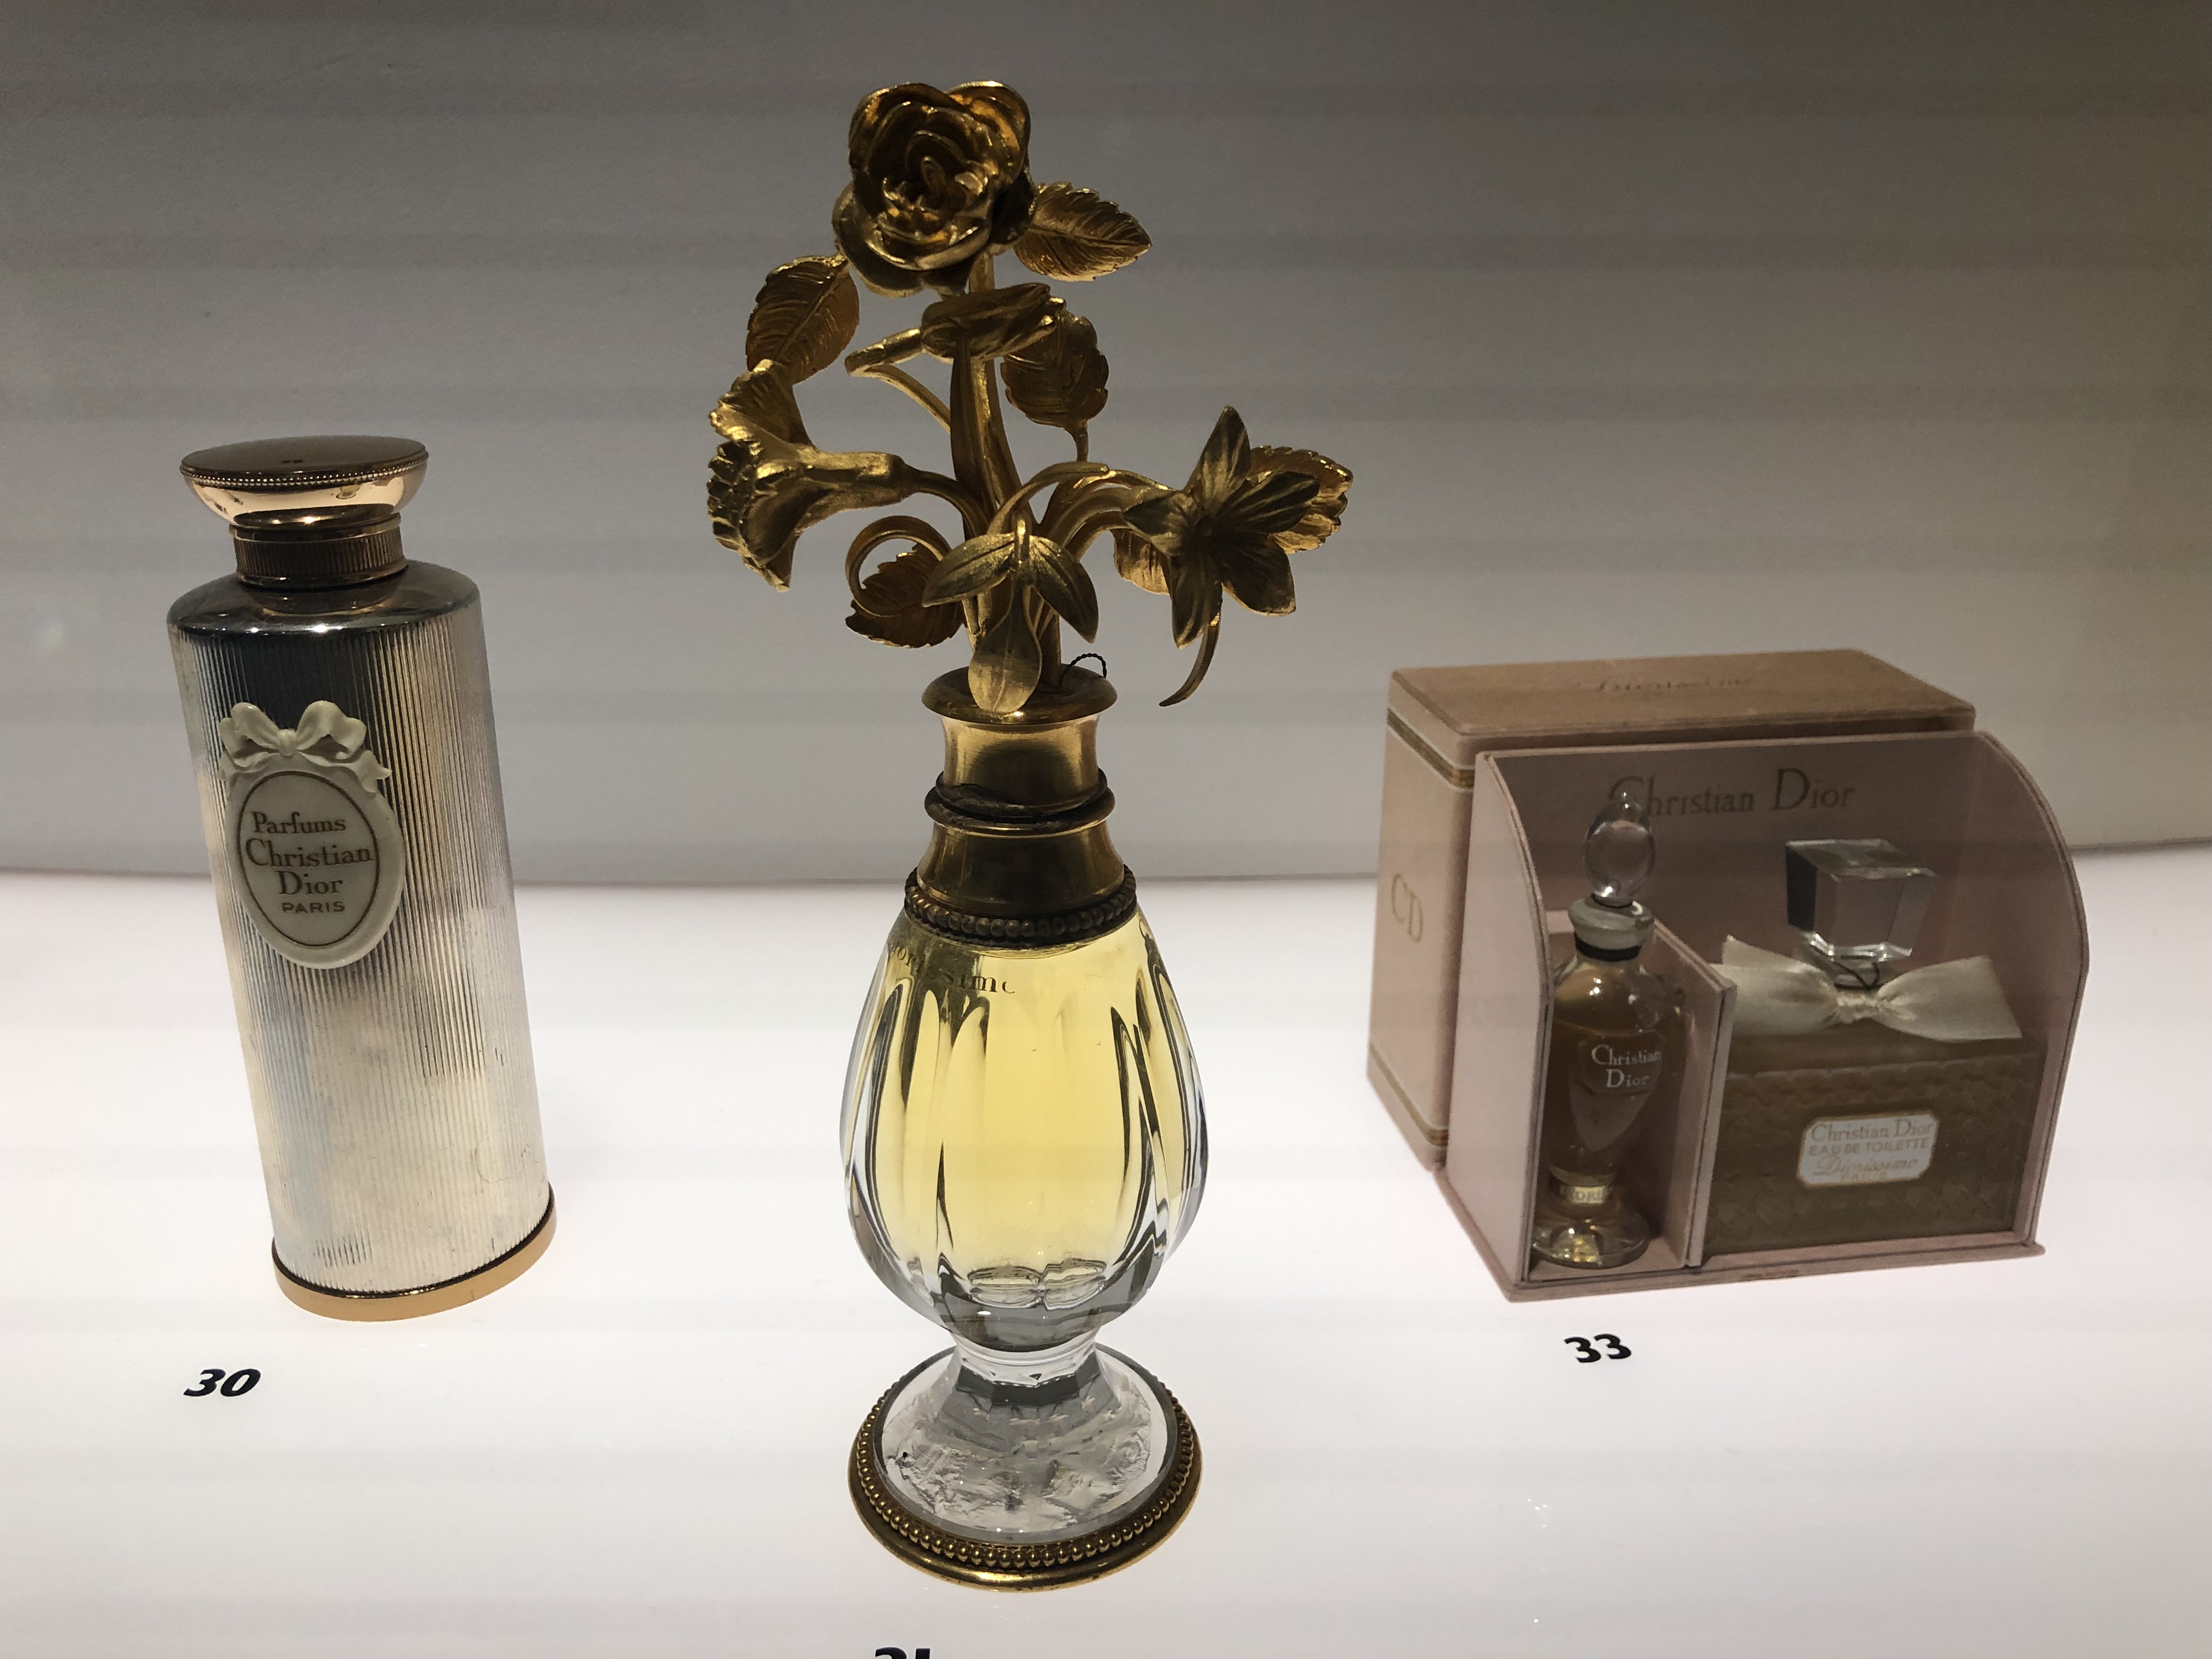 Dior Perfume Bottles And Travel Set From The 1950s